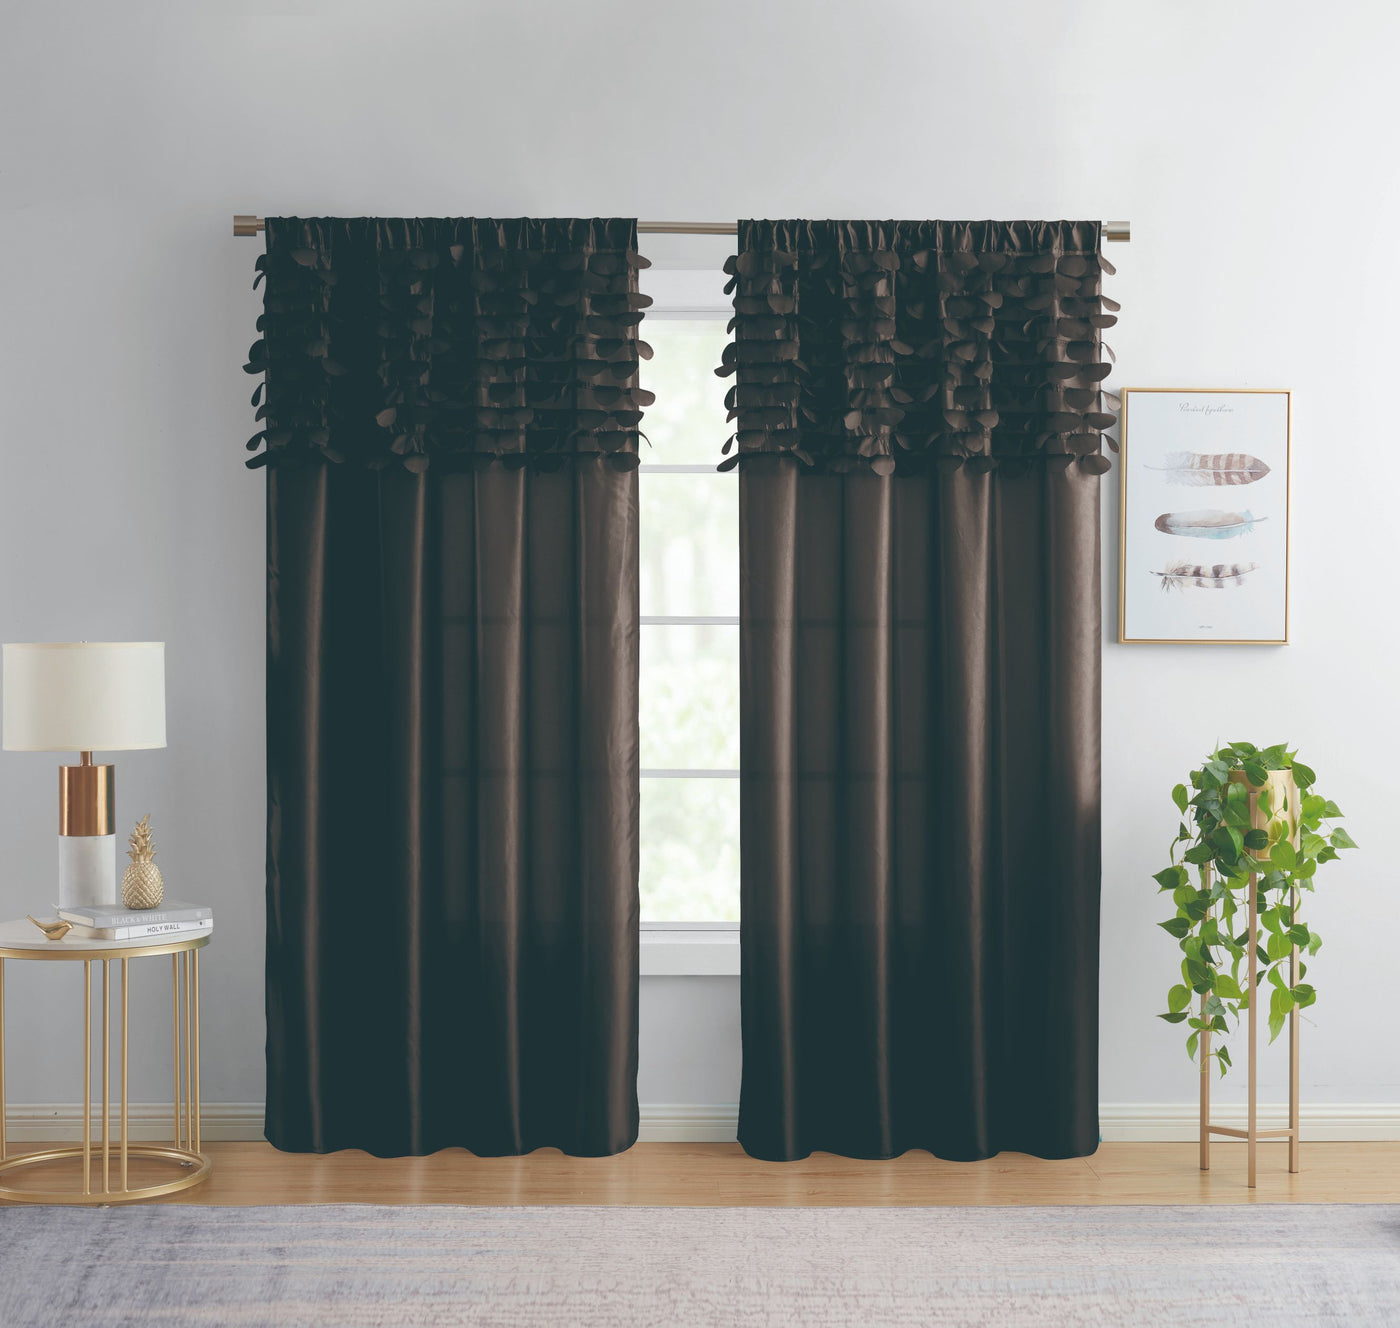 2pc Jenin-Home-Furnishing. Circle Dream Rod Pocket Curtains For Bedroom Curtains 2 Panel Sets 108" Wide Tafetta Curtain Panel Window Treatment Curtains For Living Room